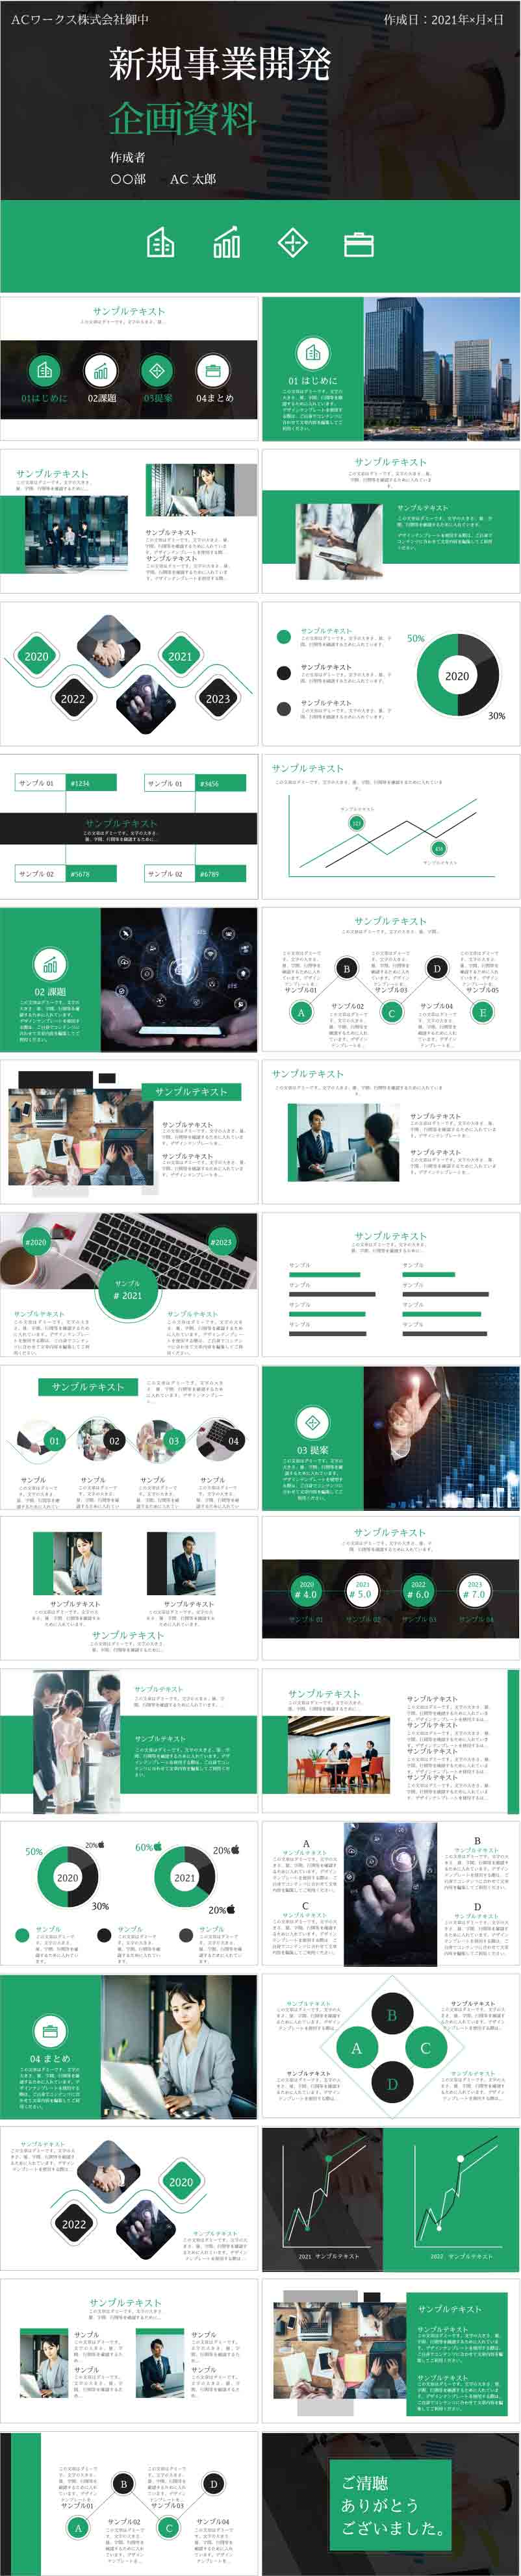 PowerPoint template vol.67